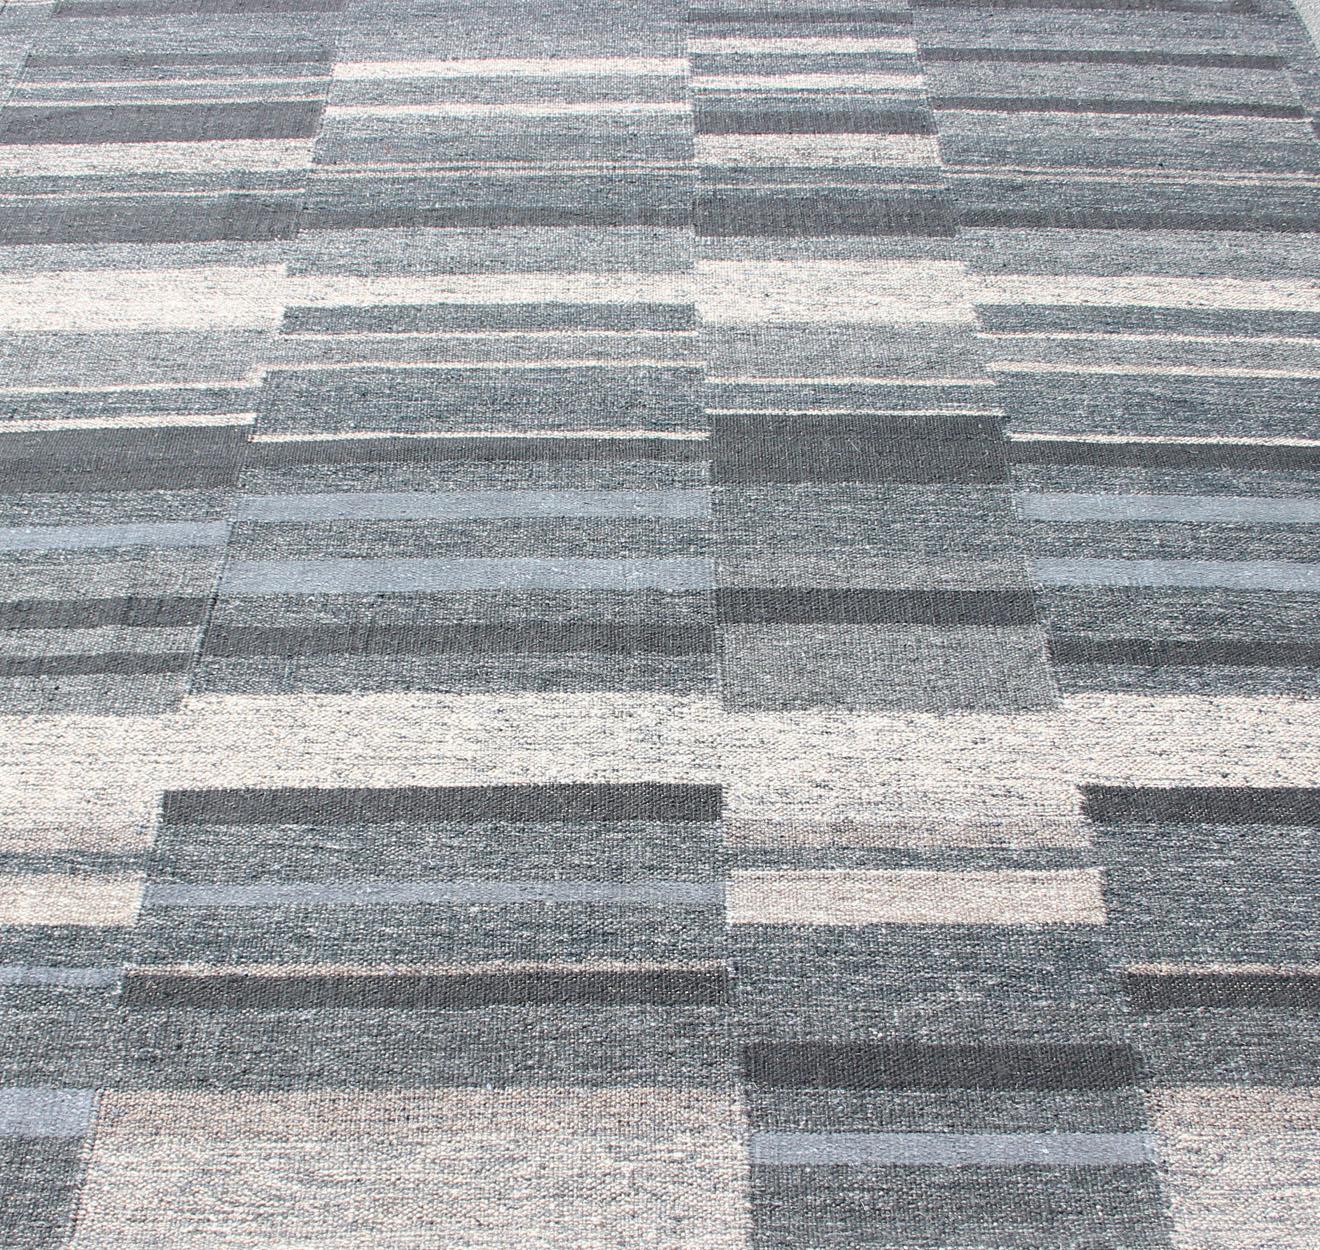 Modern Scandinavian Flat-Weave Rug with Striped Panel Design in Gray, Steel Blue In New Condition For Sale In Atlanta, GA